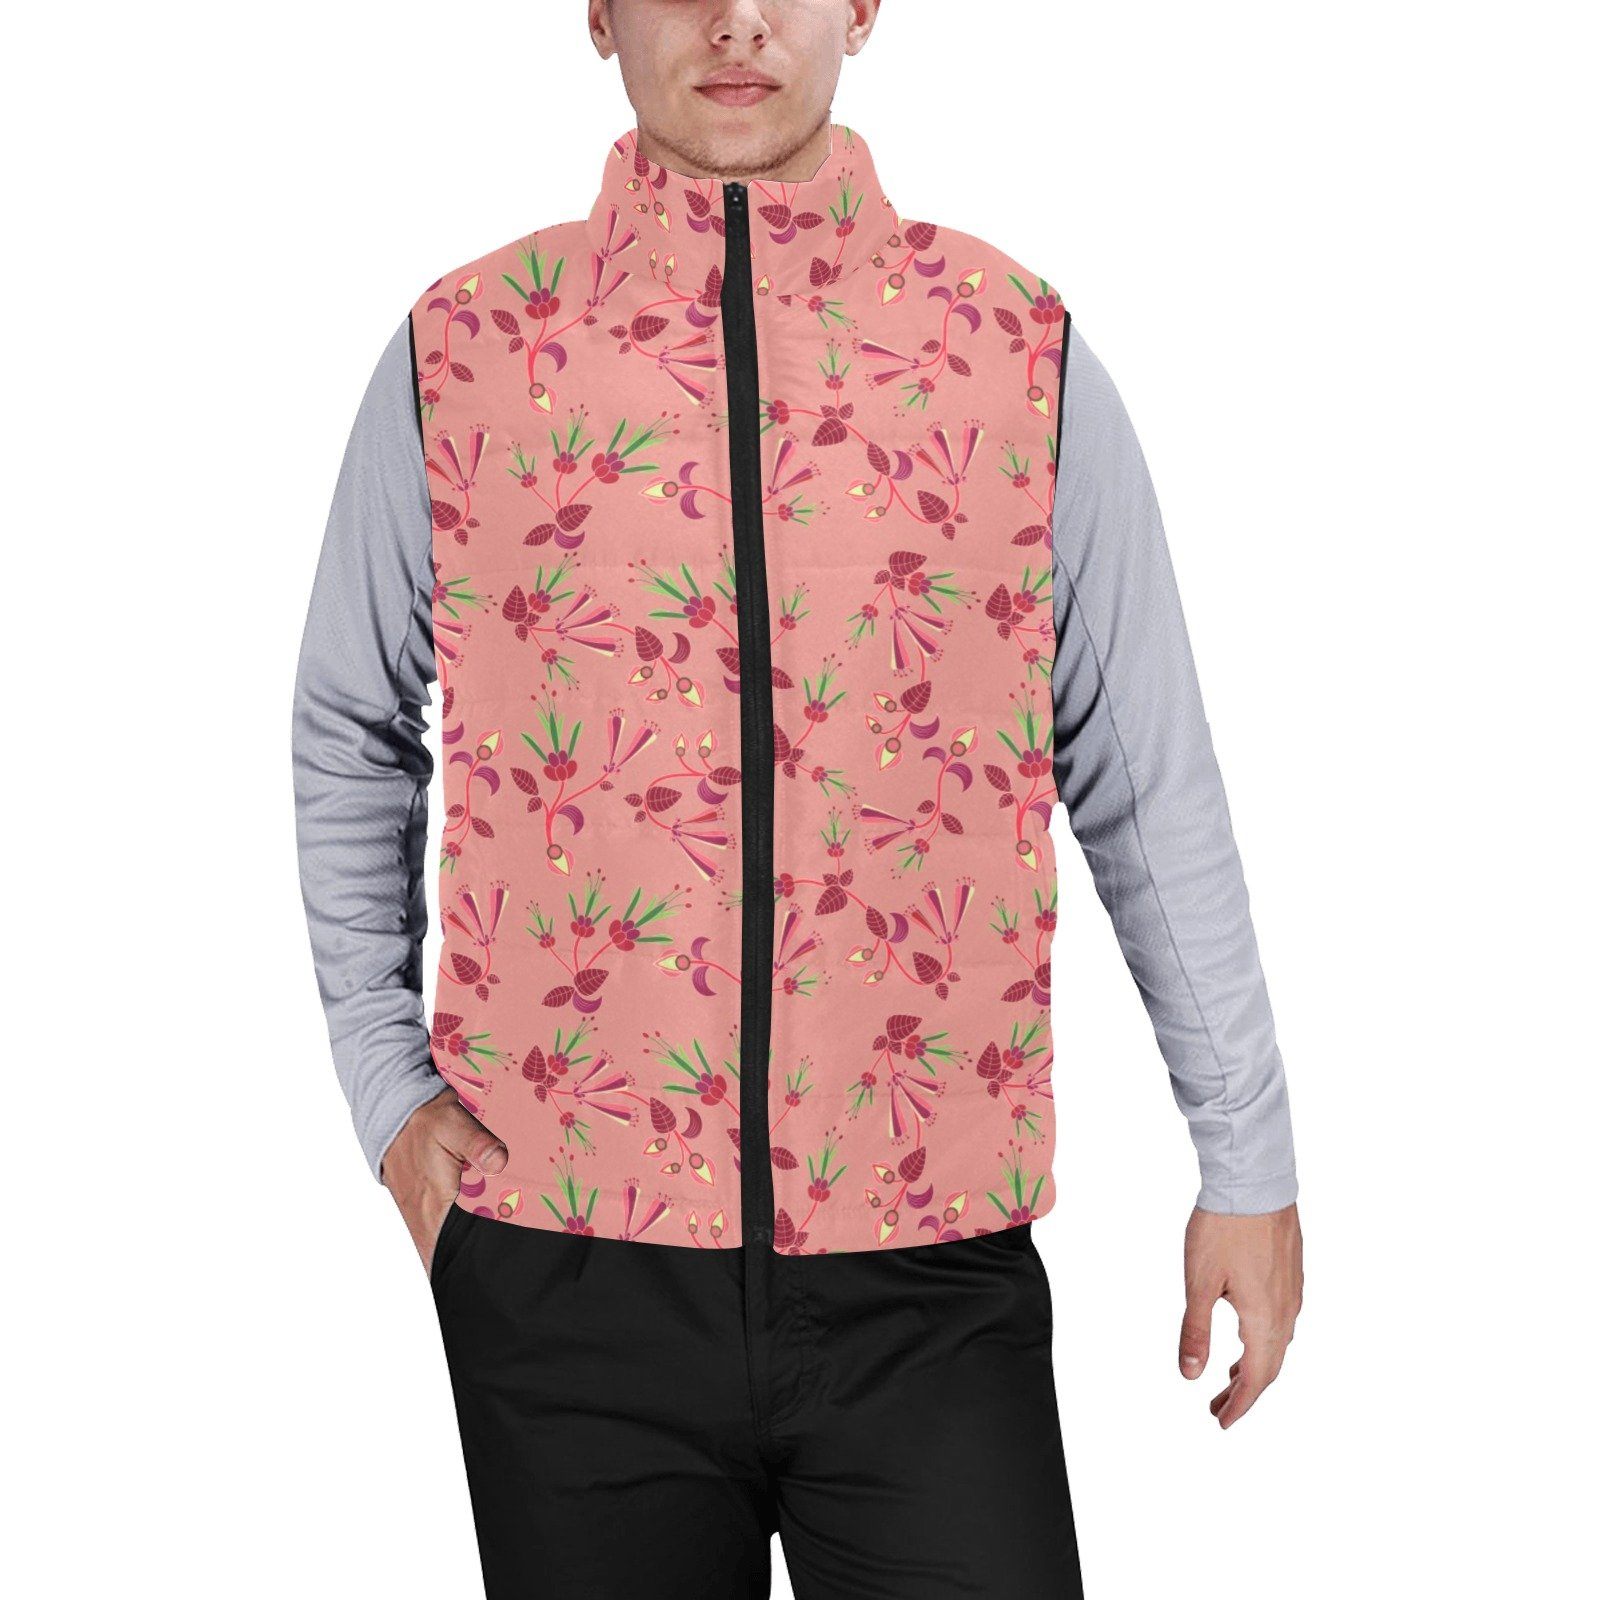 Swift Floral Peach Rouge Remix Men's Padded Vest Jacket (Model H44) Men's Padded Vest Jacket (H44) e-joyer 